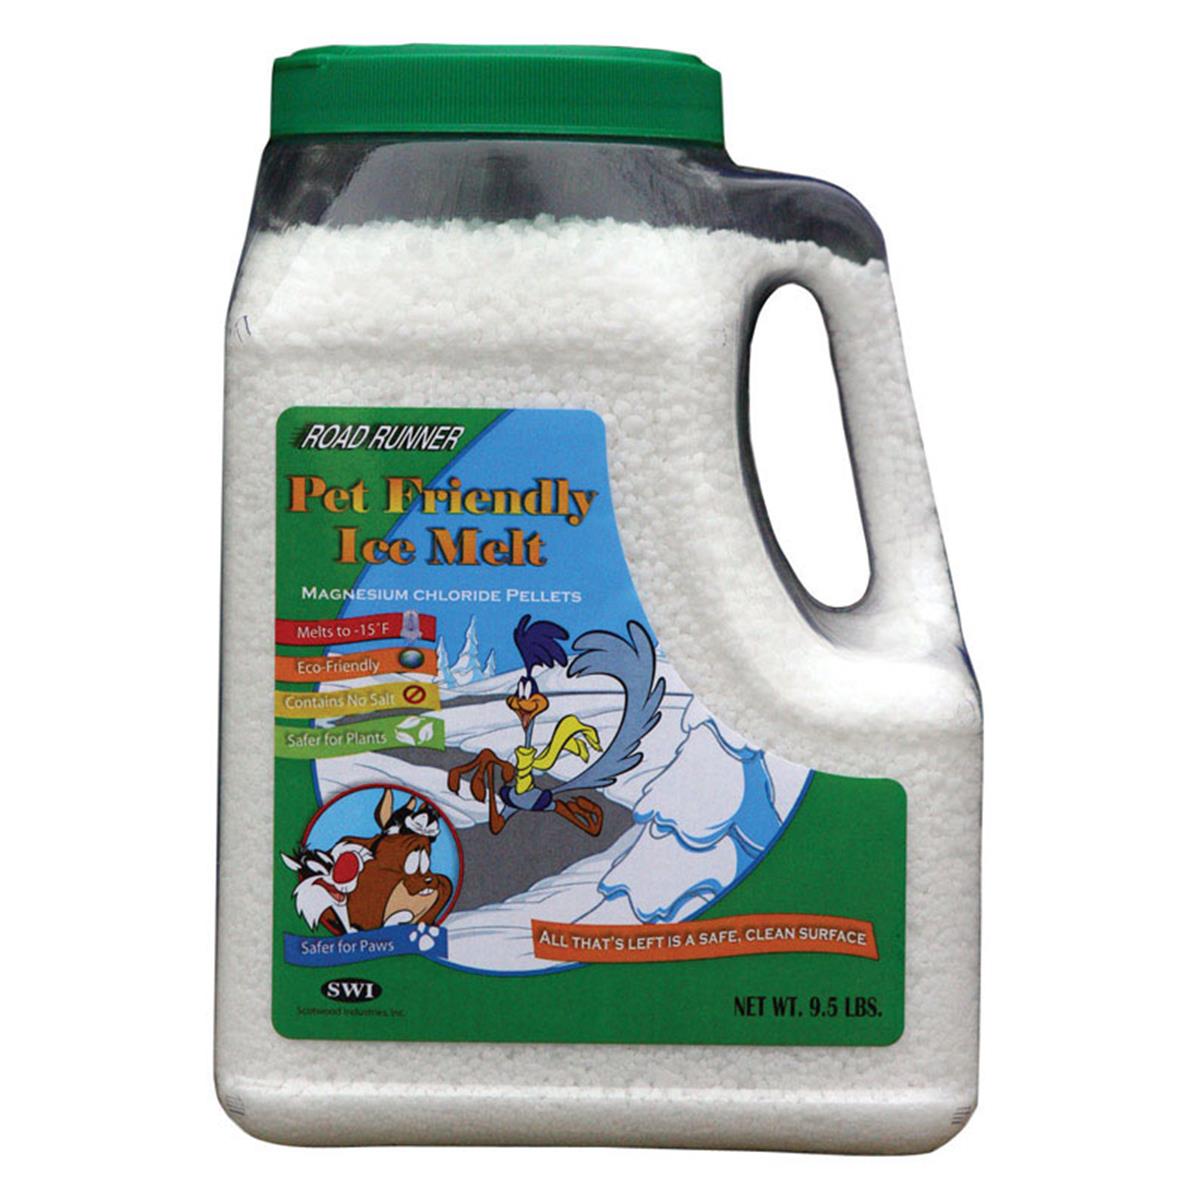 Picture of Road Runner 7204274 9.5 lbs Scotwood Magnesium Chloride Pet Friendly Ice Melt - Pack of 4